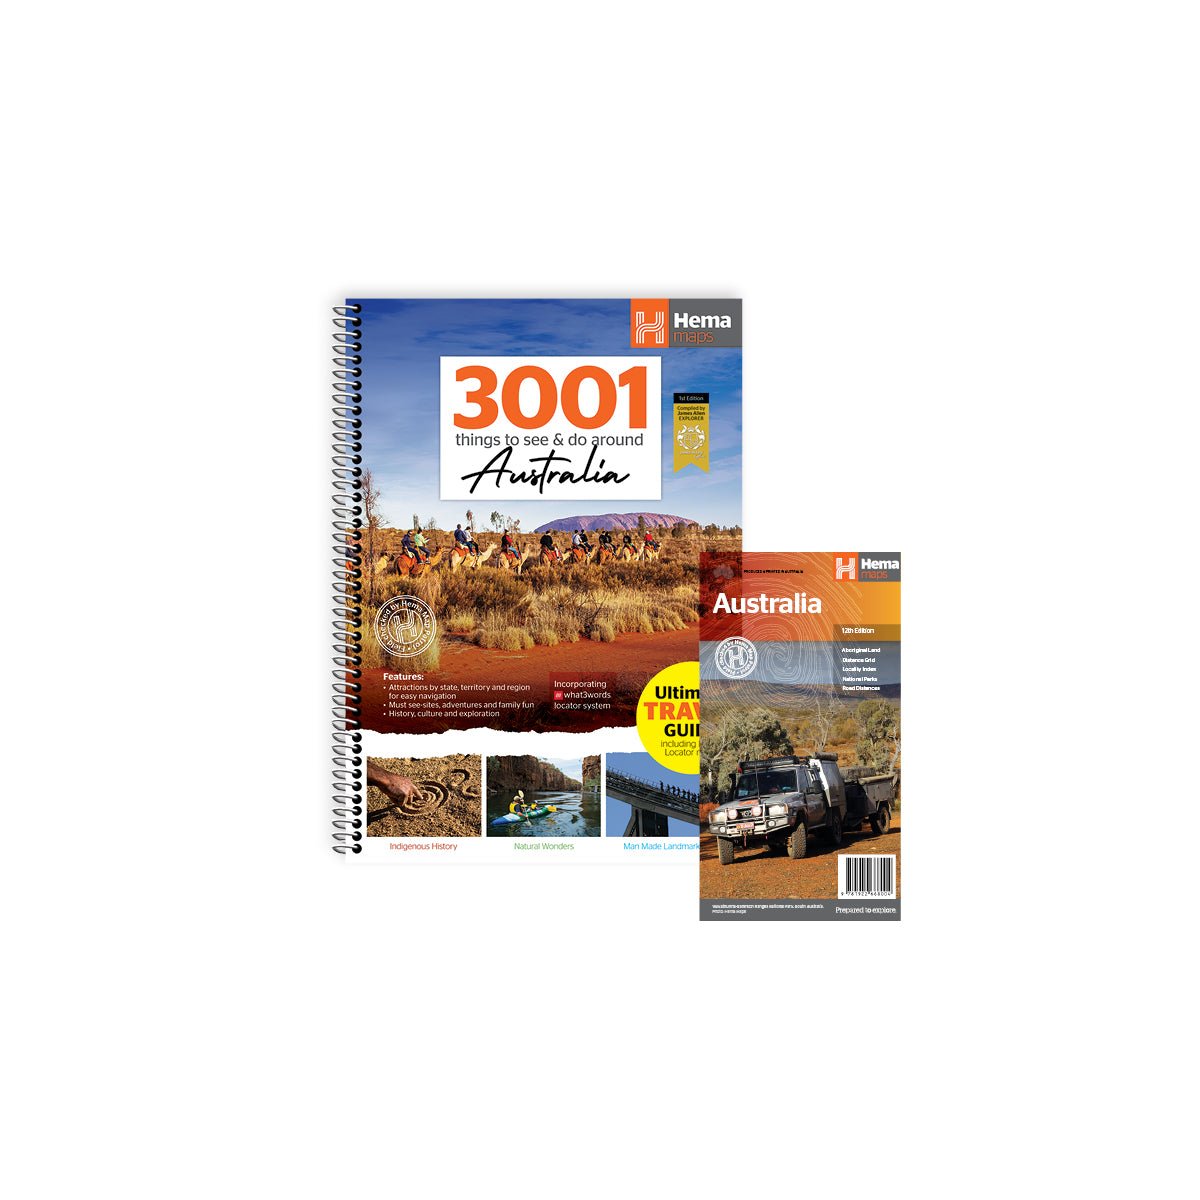 3001 Things to See and Do in Australia with bonus Australia Large Map | Hema Maps - Other | A247 Gear